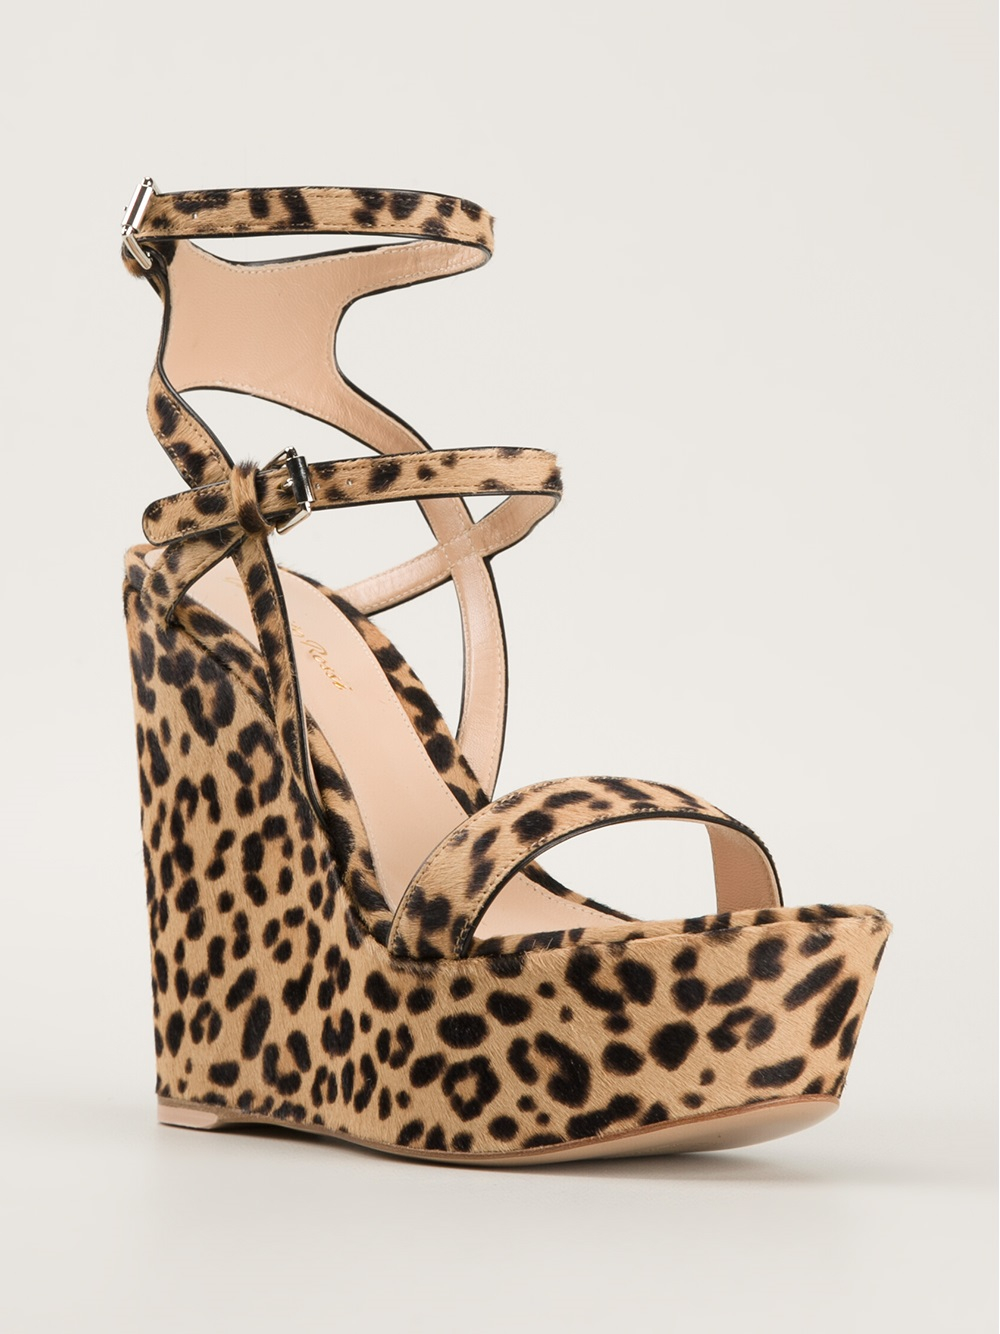 Gianvito Rossi Leopard Print Wedge Sandals - Lyst